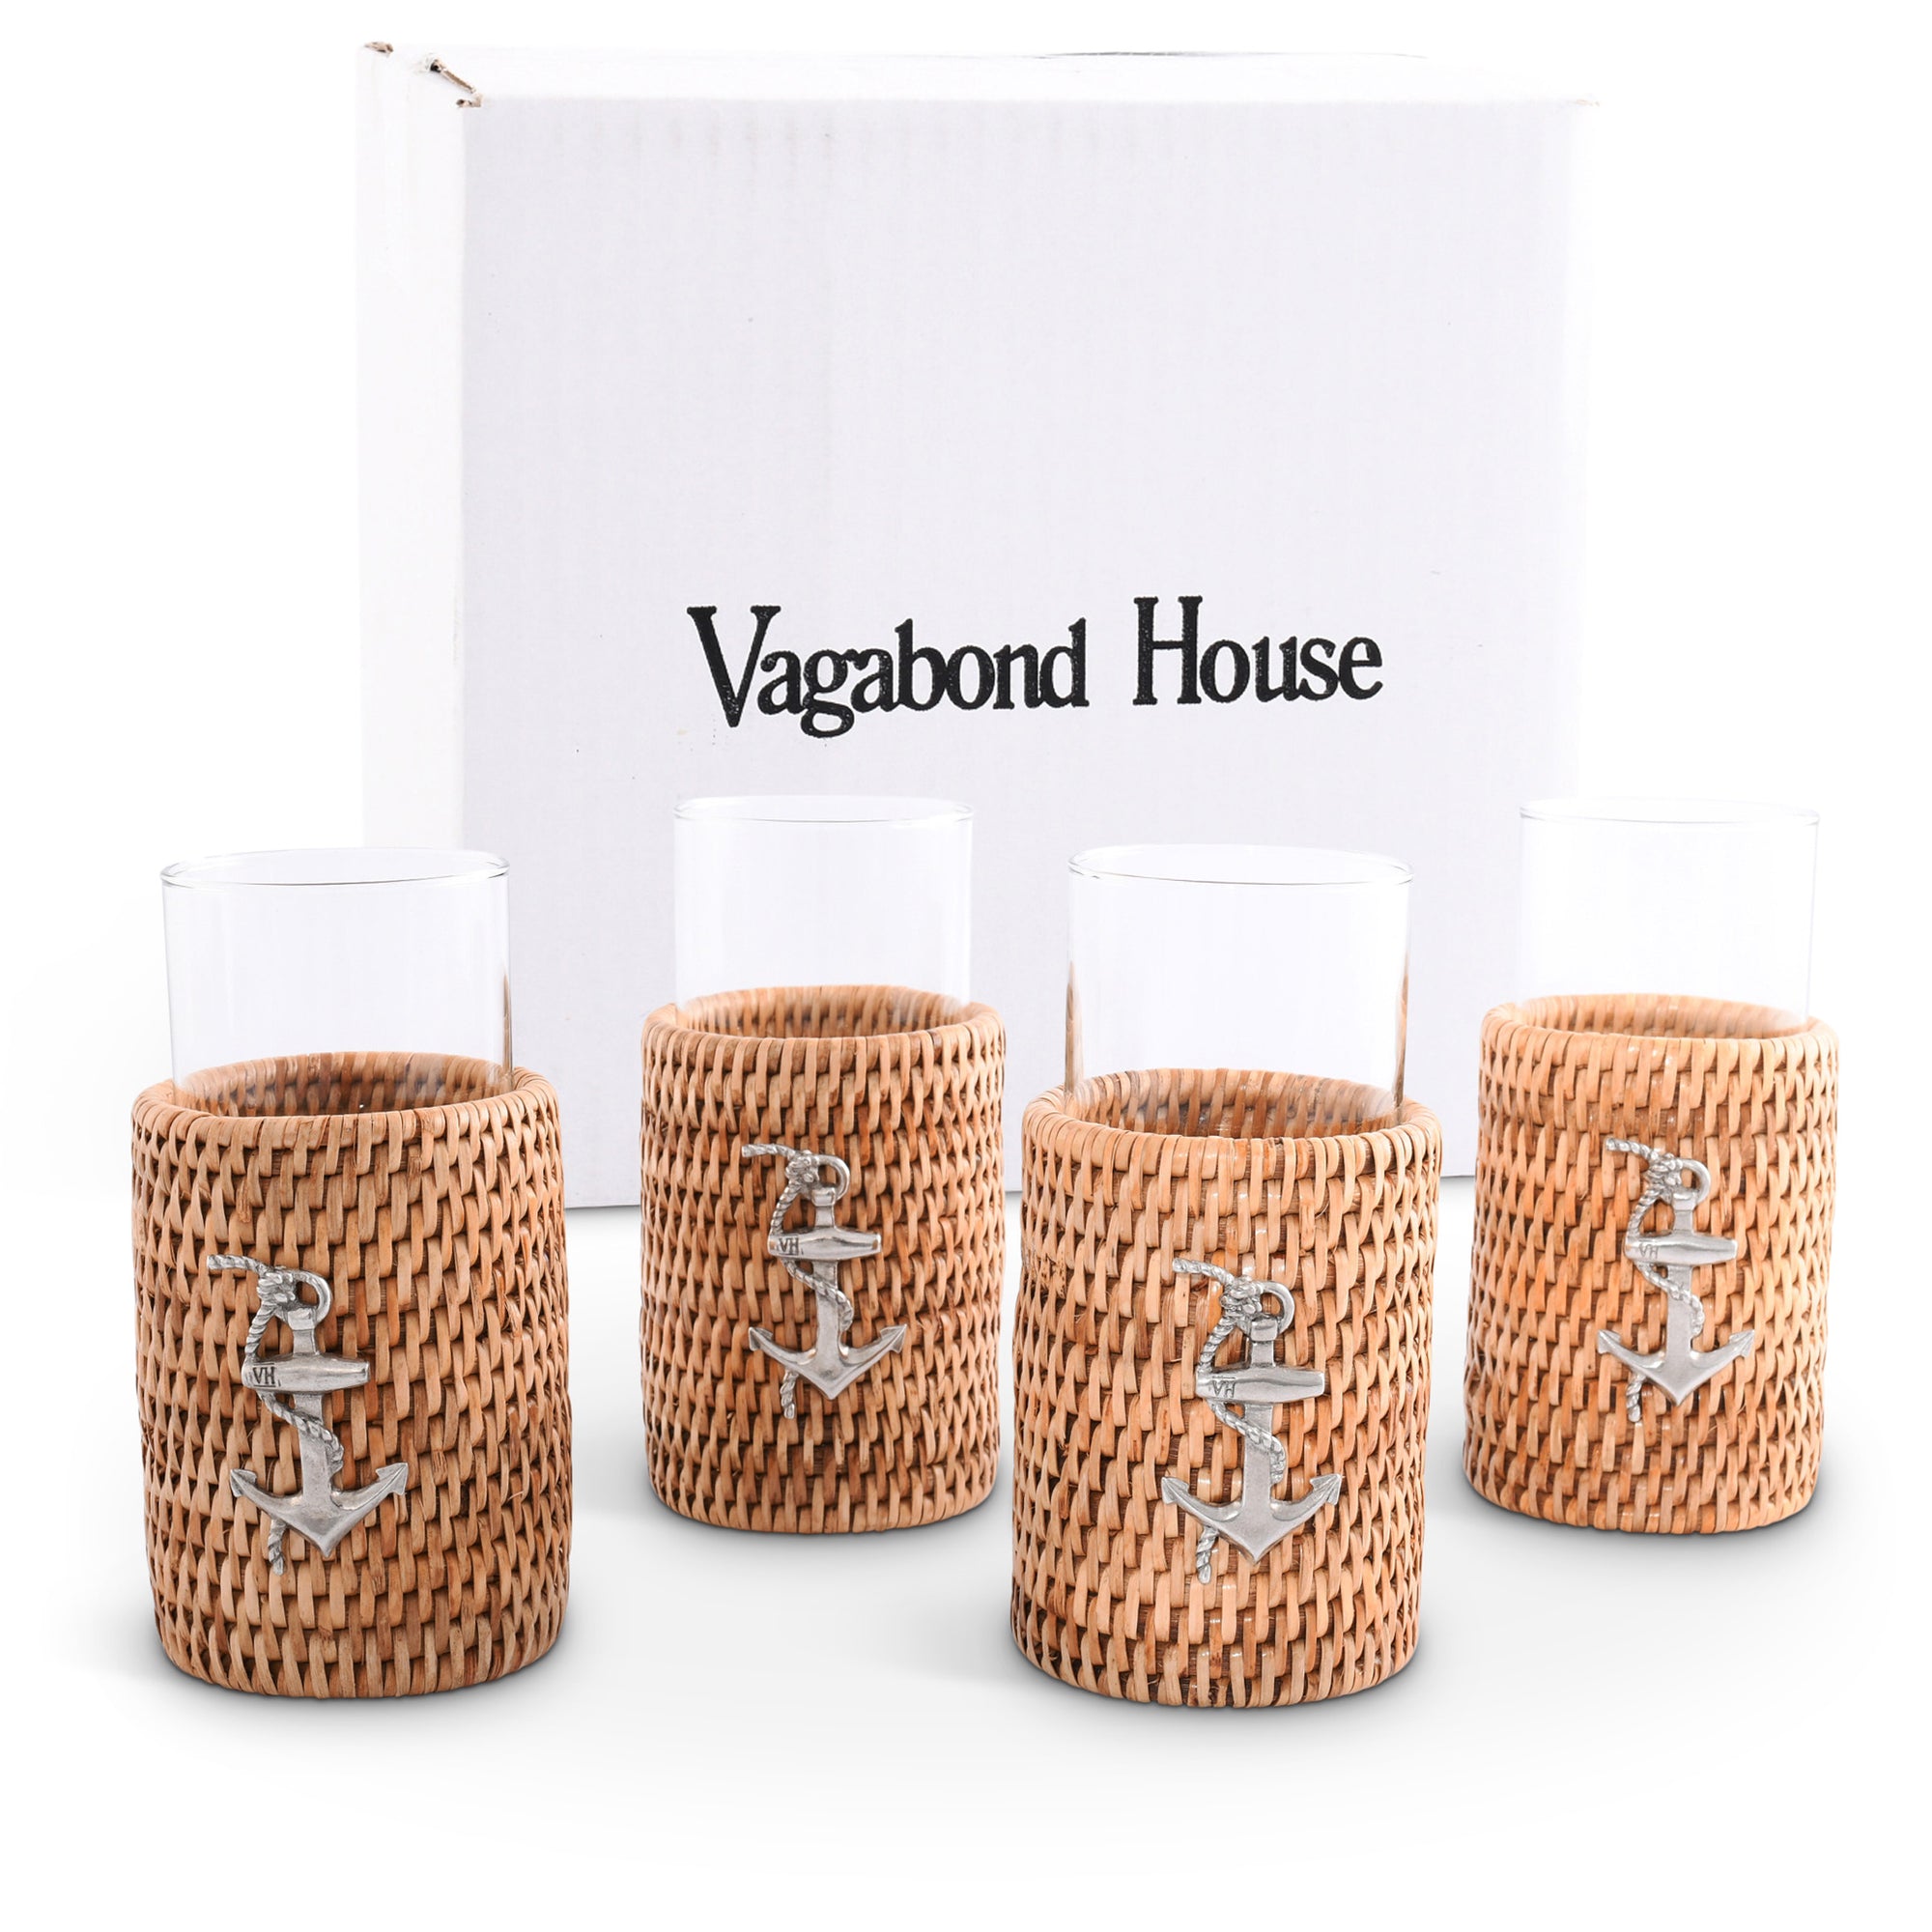 Vagabond House Anchor Drinking Glass Covered with Hand Woven Wicker Rattan - Set of 4 Product Image